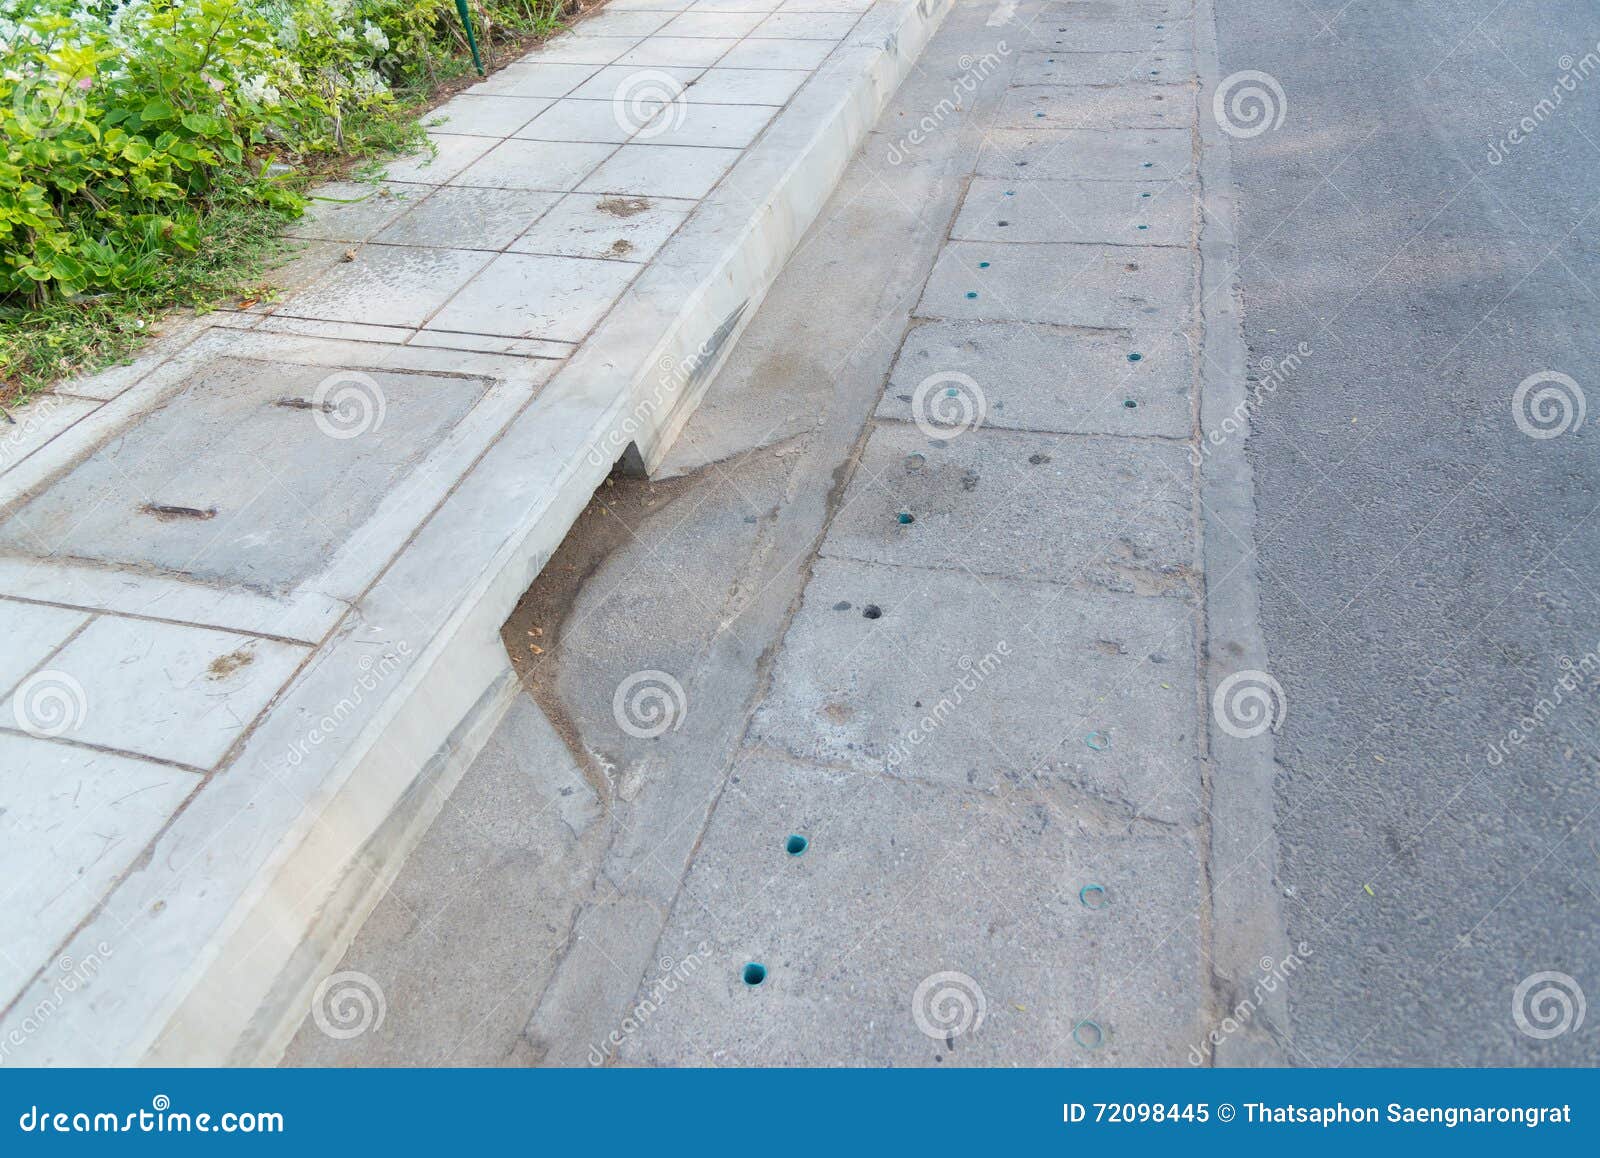 Drain Gutter In The Road, Next To Pavement Stock Image Image of construction, sewer 72098445